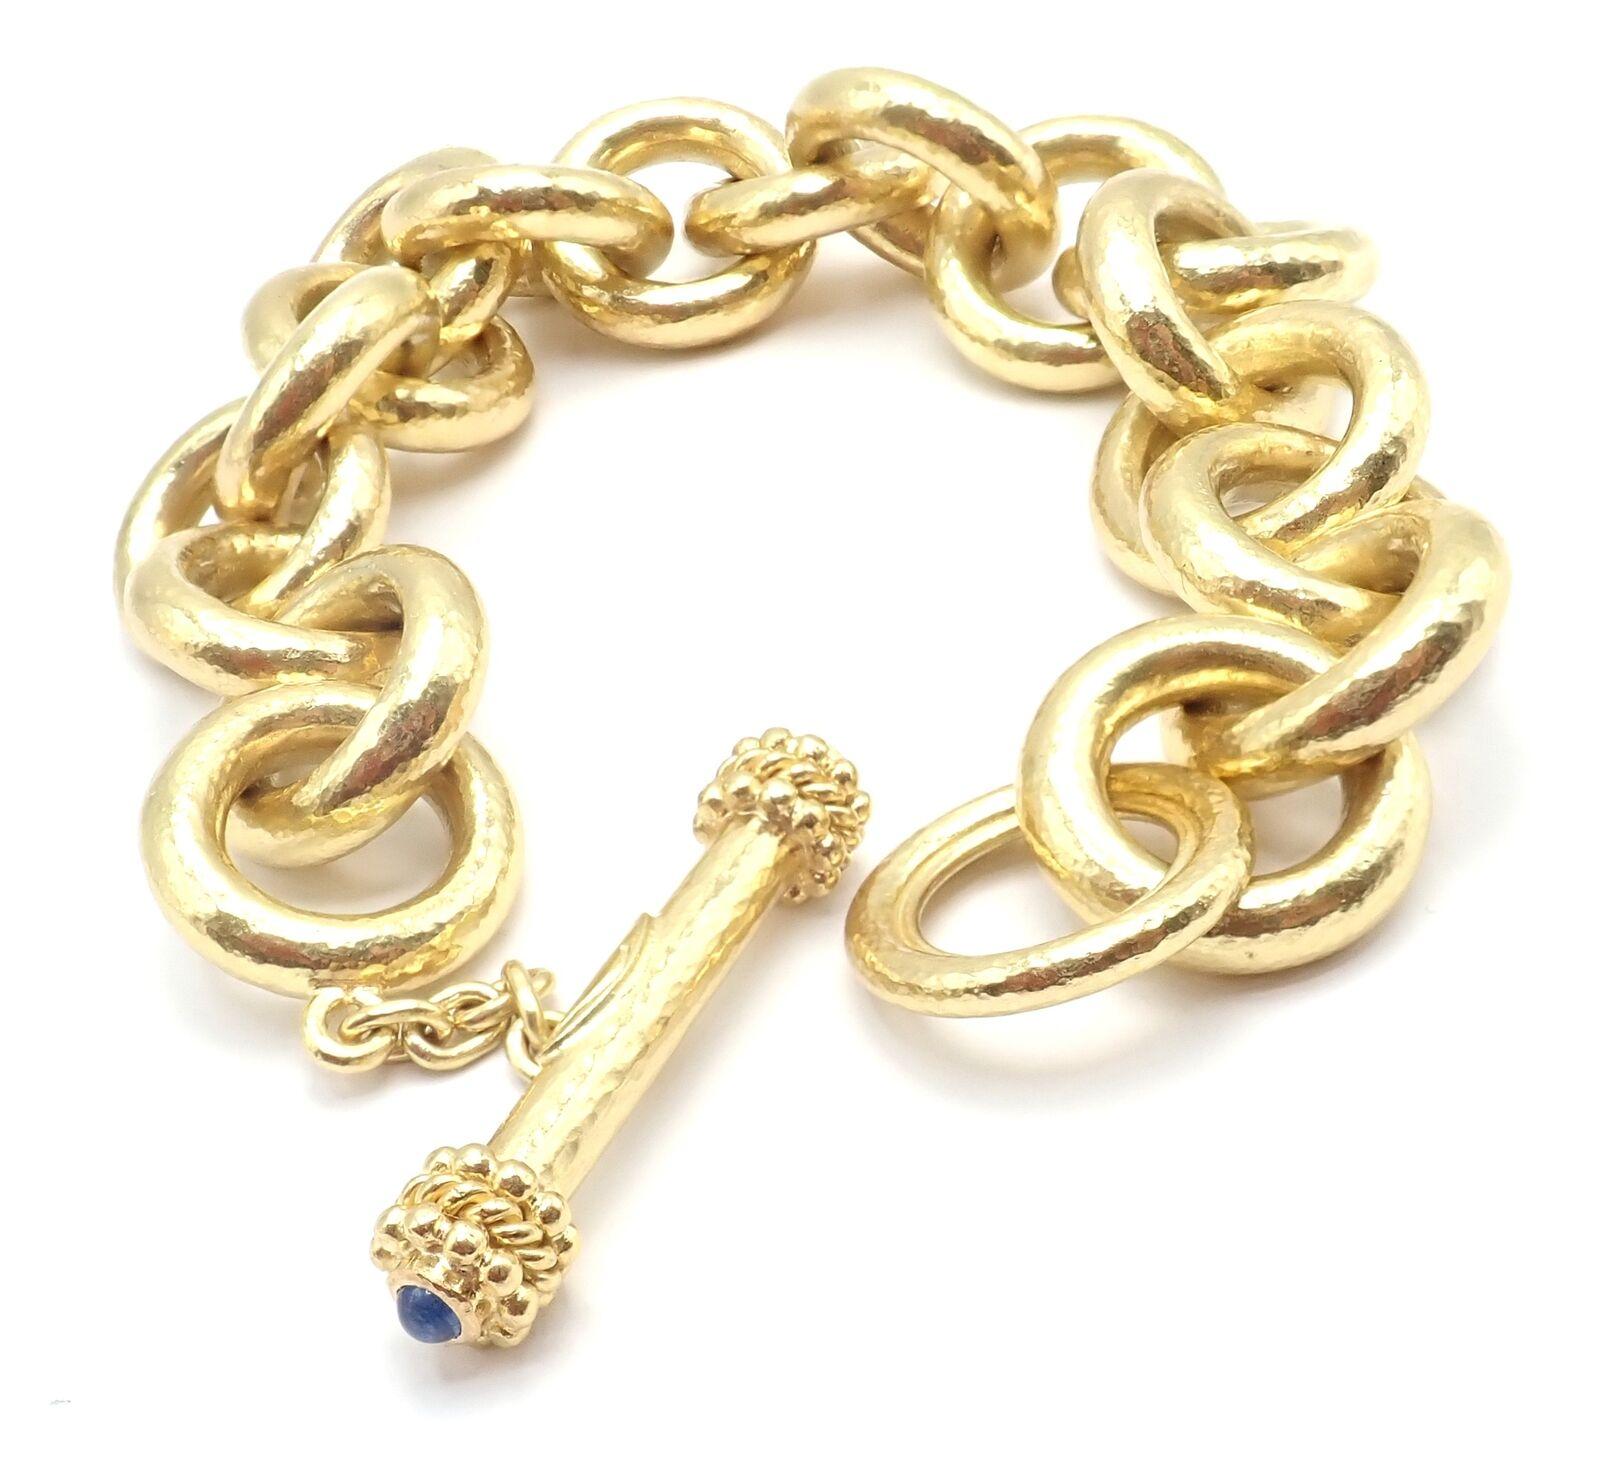 18k Yellow Hammered Gold Sapphire Toggle Link Bracelet by Elizabeth Locke. 
With 2 cabochon sapphires.
Details: 
Length: 8